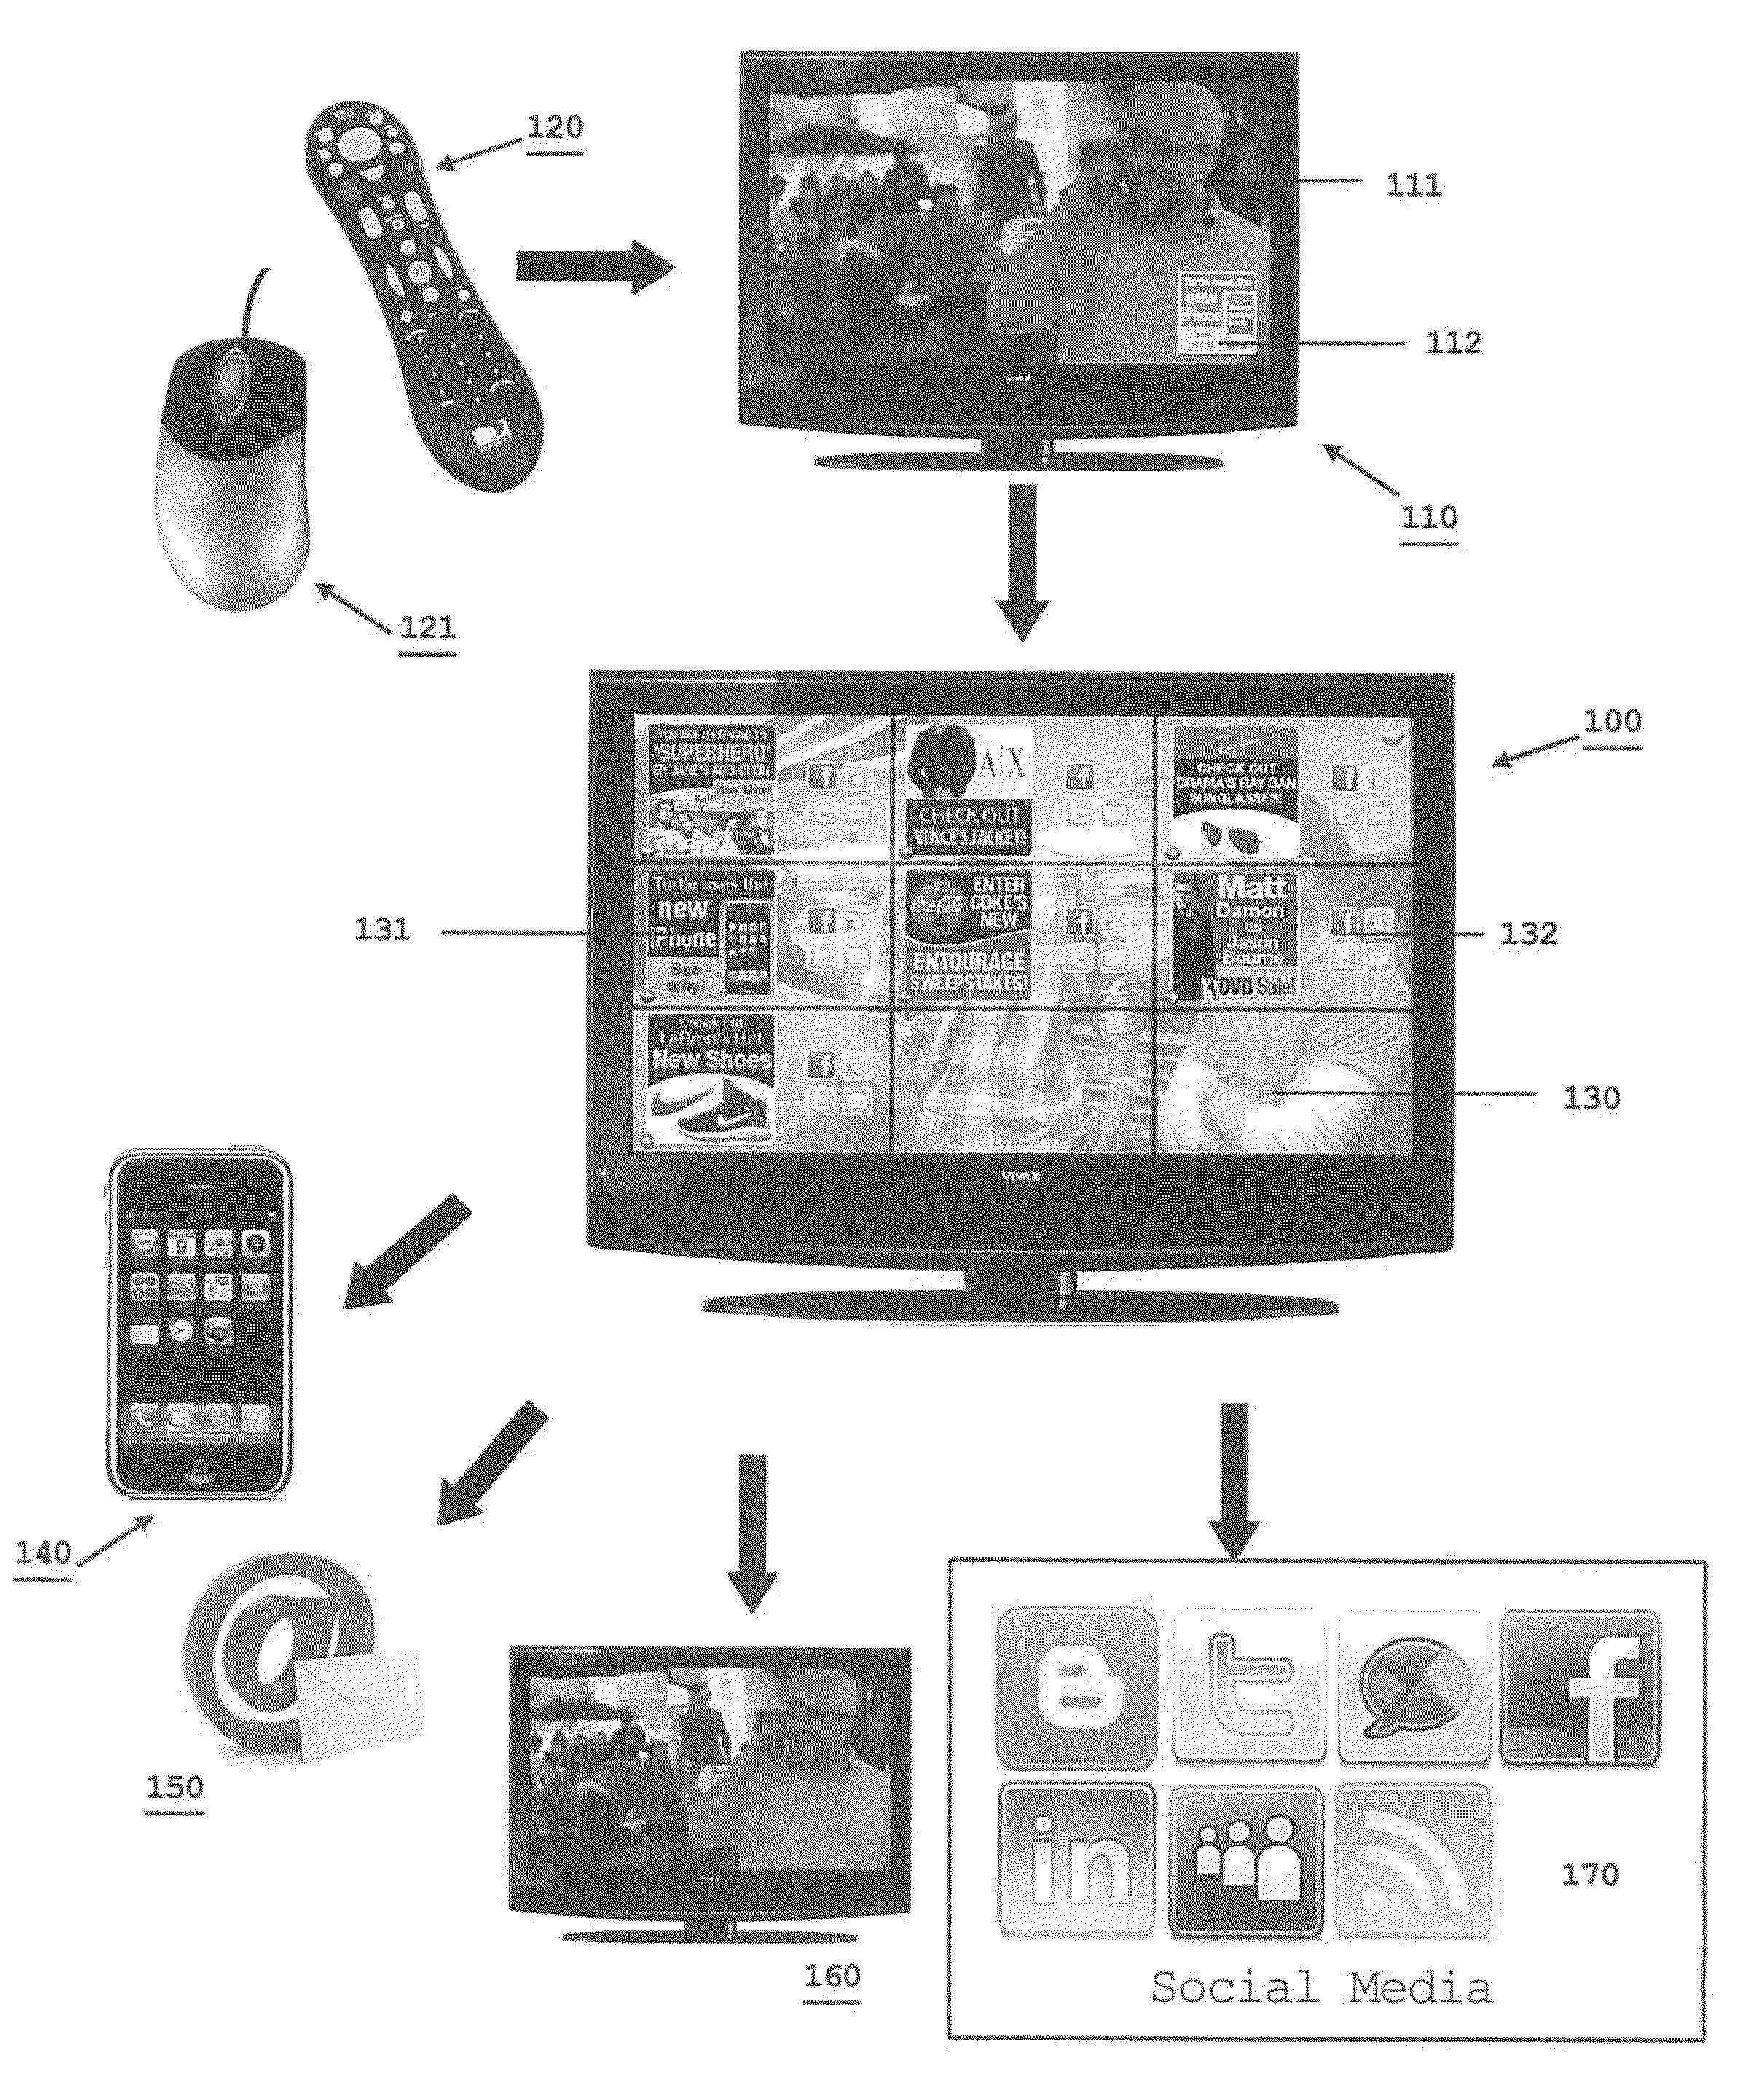 System and Method for Integrating Interactive Advertising Into Real Time Video Content